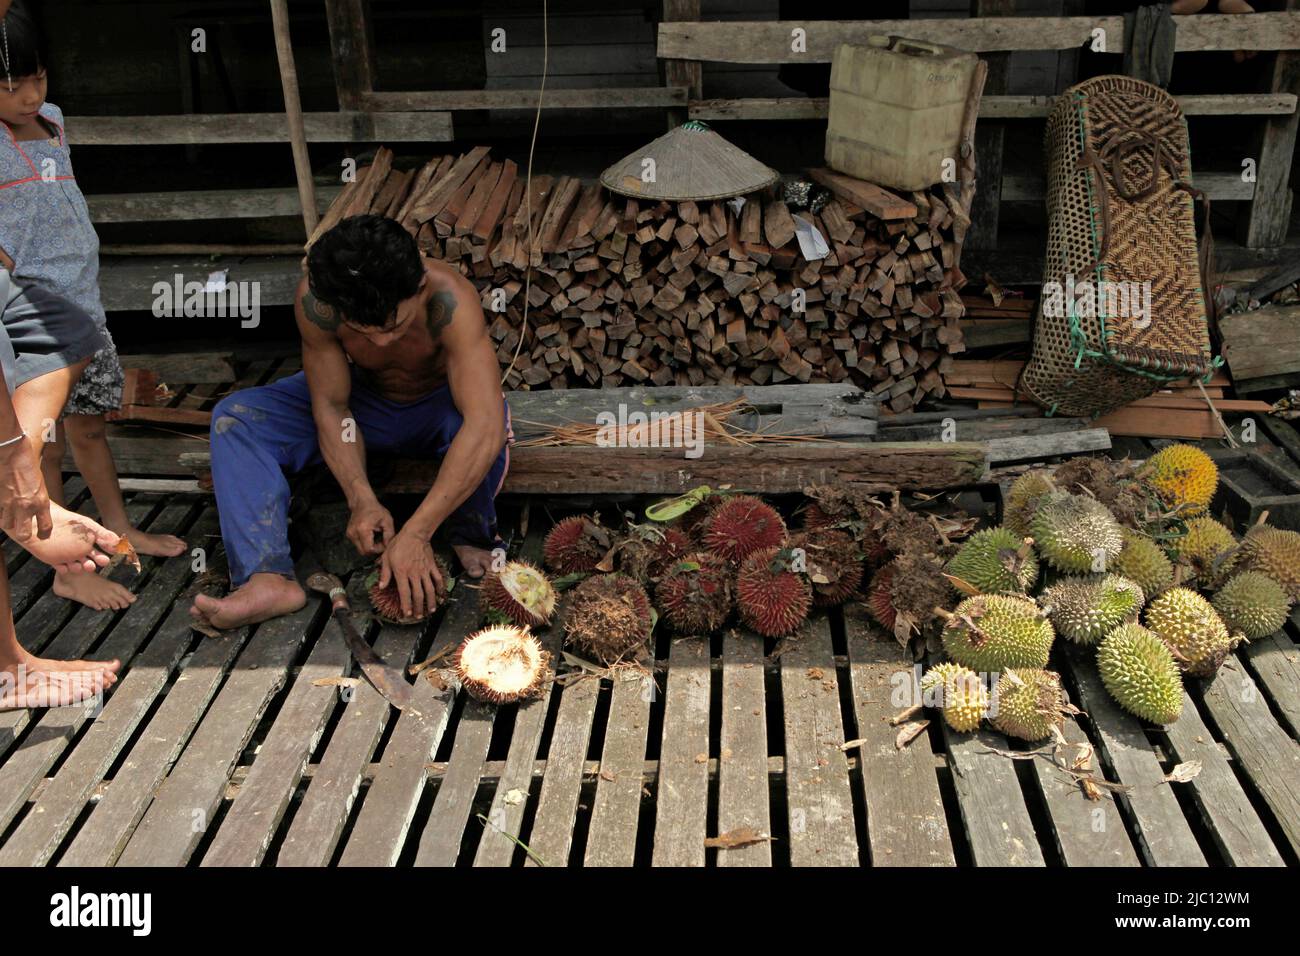 A man opening red durian fruits that are freshly harvested along with durians as he is sitting on the terrace of the longhouse of traditional Dayak Iban community in Sungai Utik, Batu Lintang, Embaloh Hulu, Kapuas Hulu, West Kalimantan, Indonesia. Stock Photo